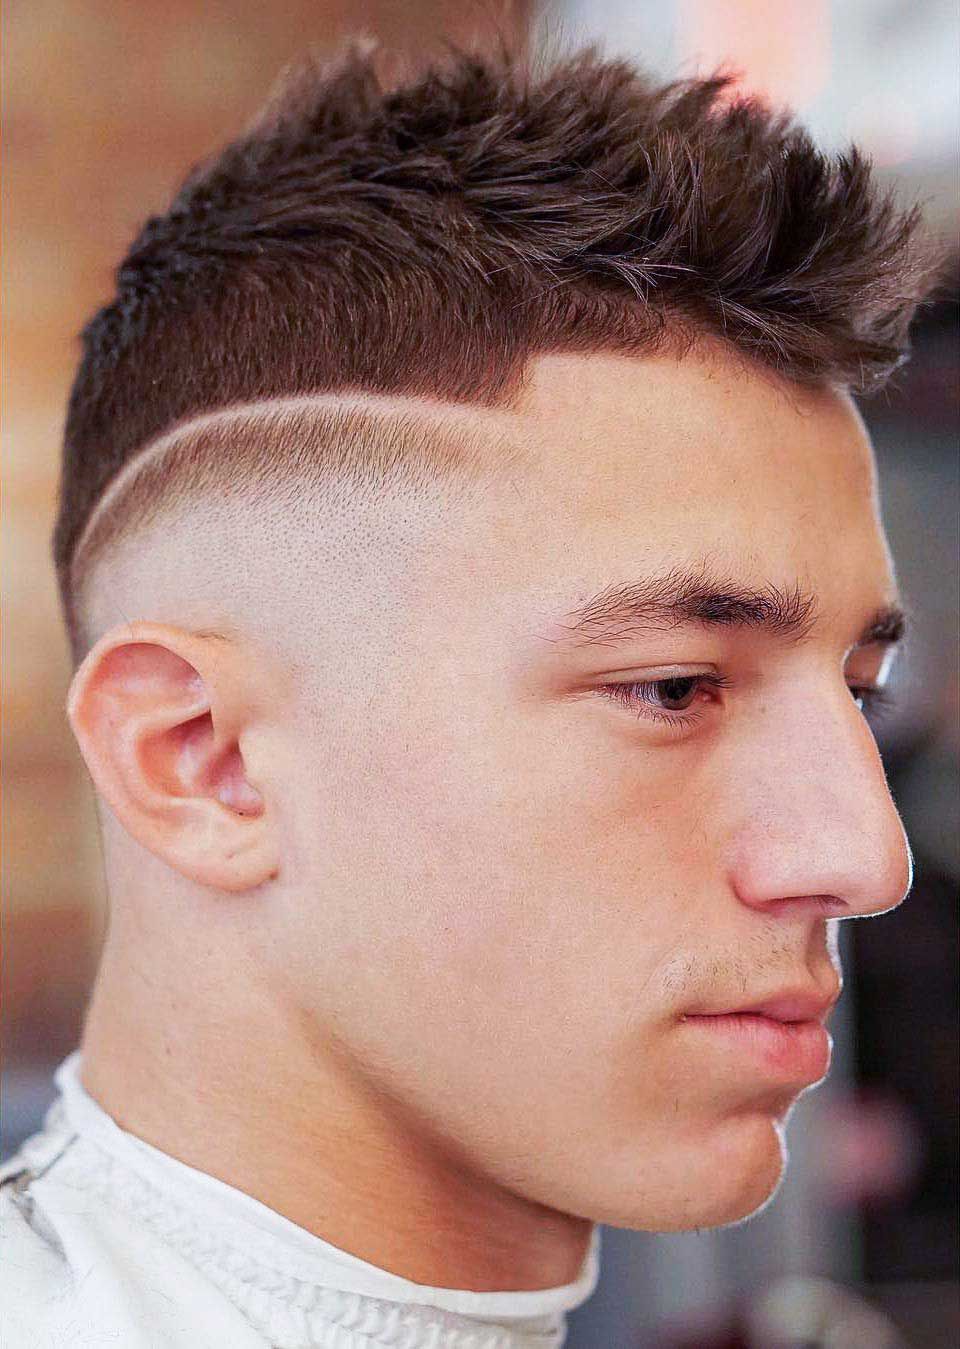 20 Drop Fade Haircuts Ideas – New Twist On A Classic Throughout Widely Used Mohawk Haircuts On Curls With Parting (View 19 of 20)